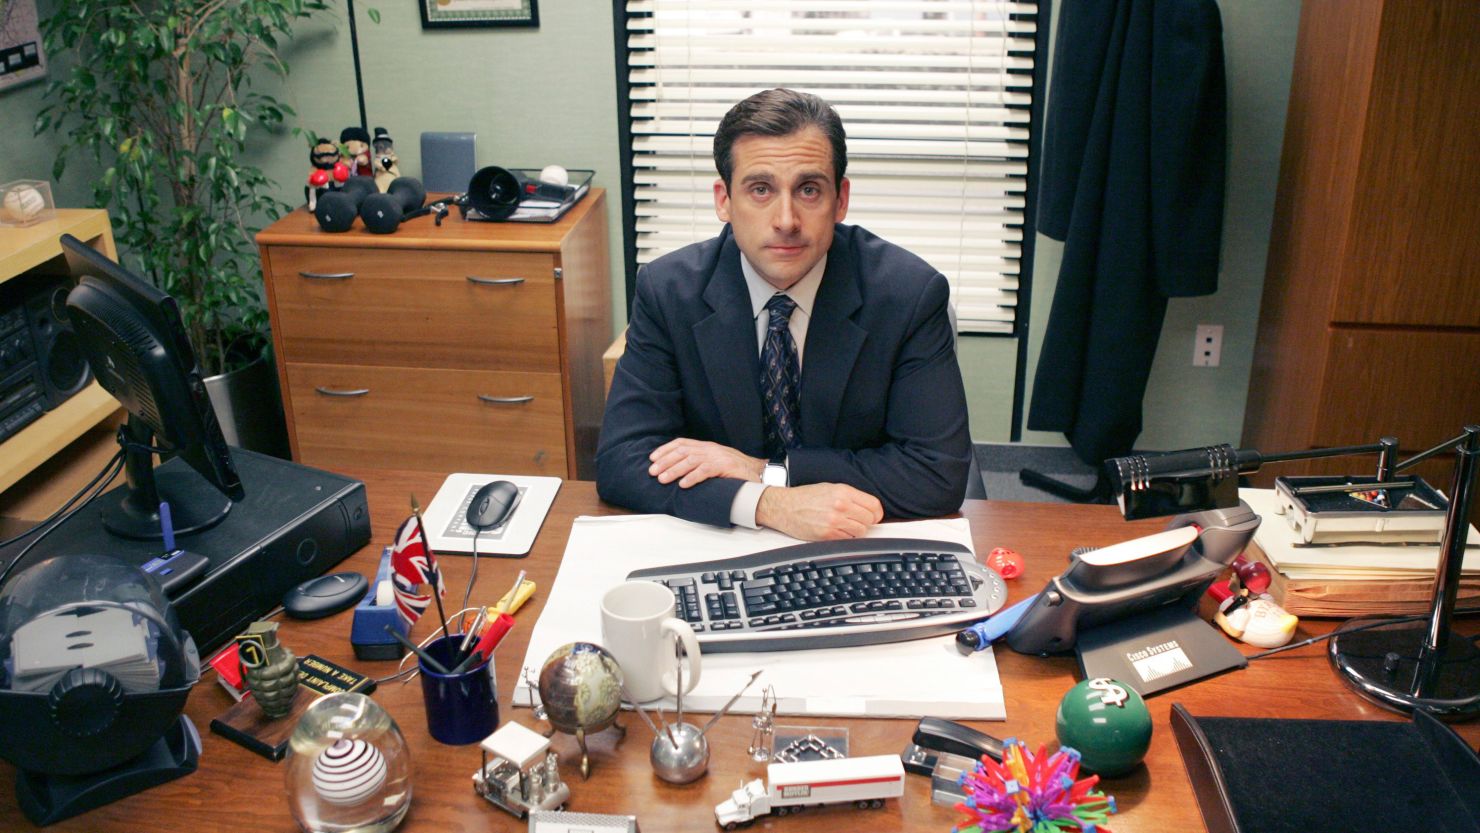 Steve Carell says filming Michael Scott's farewell on 'The Office